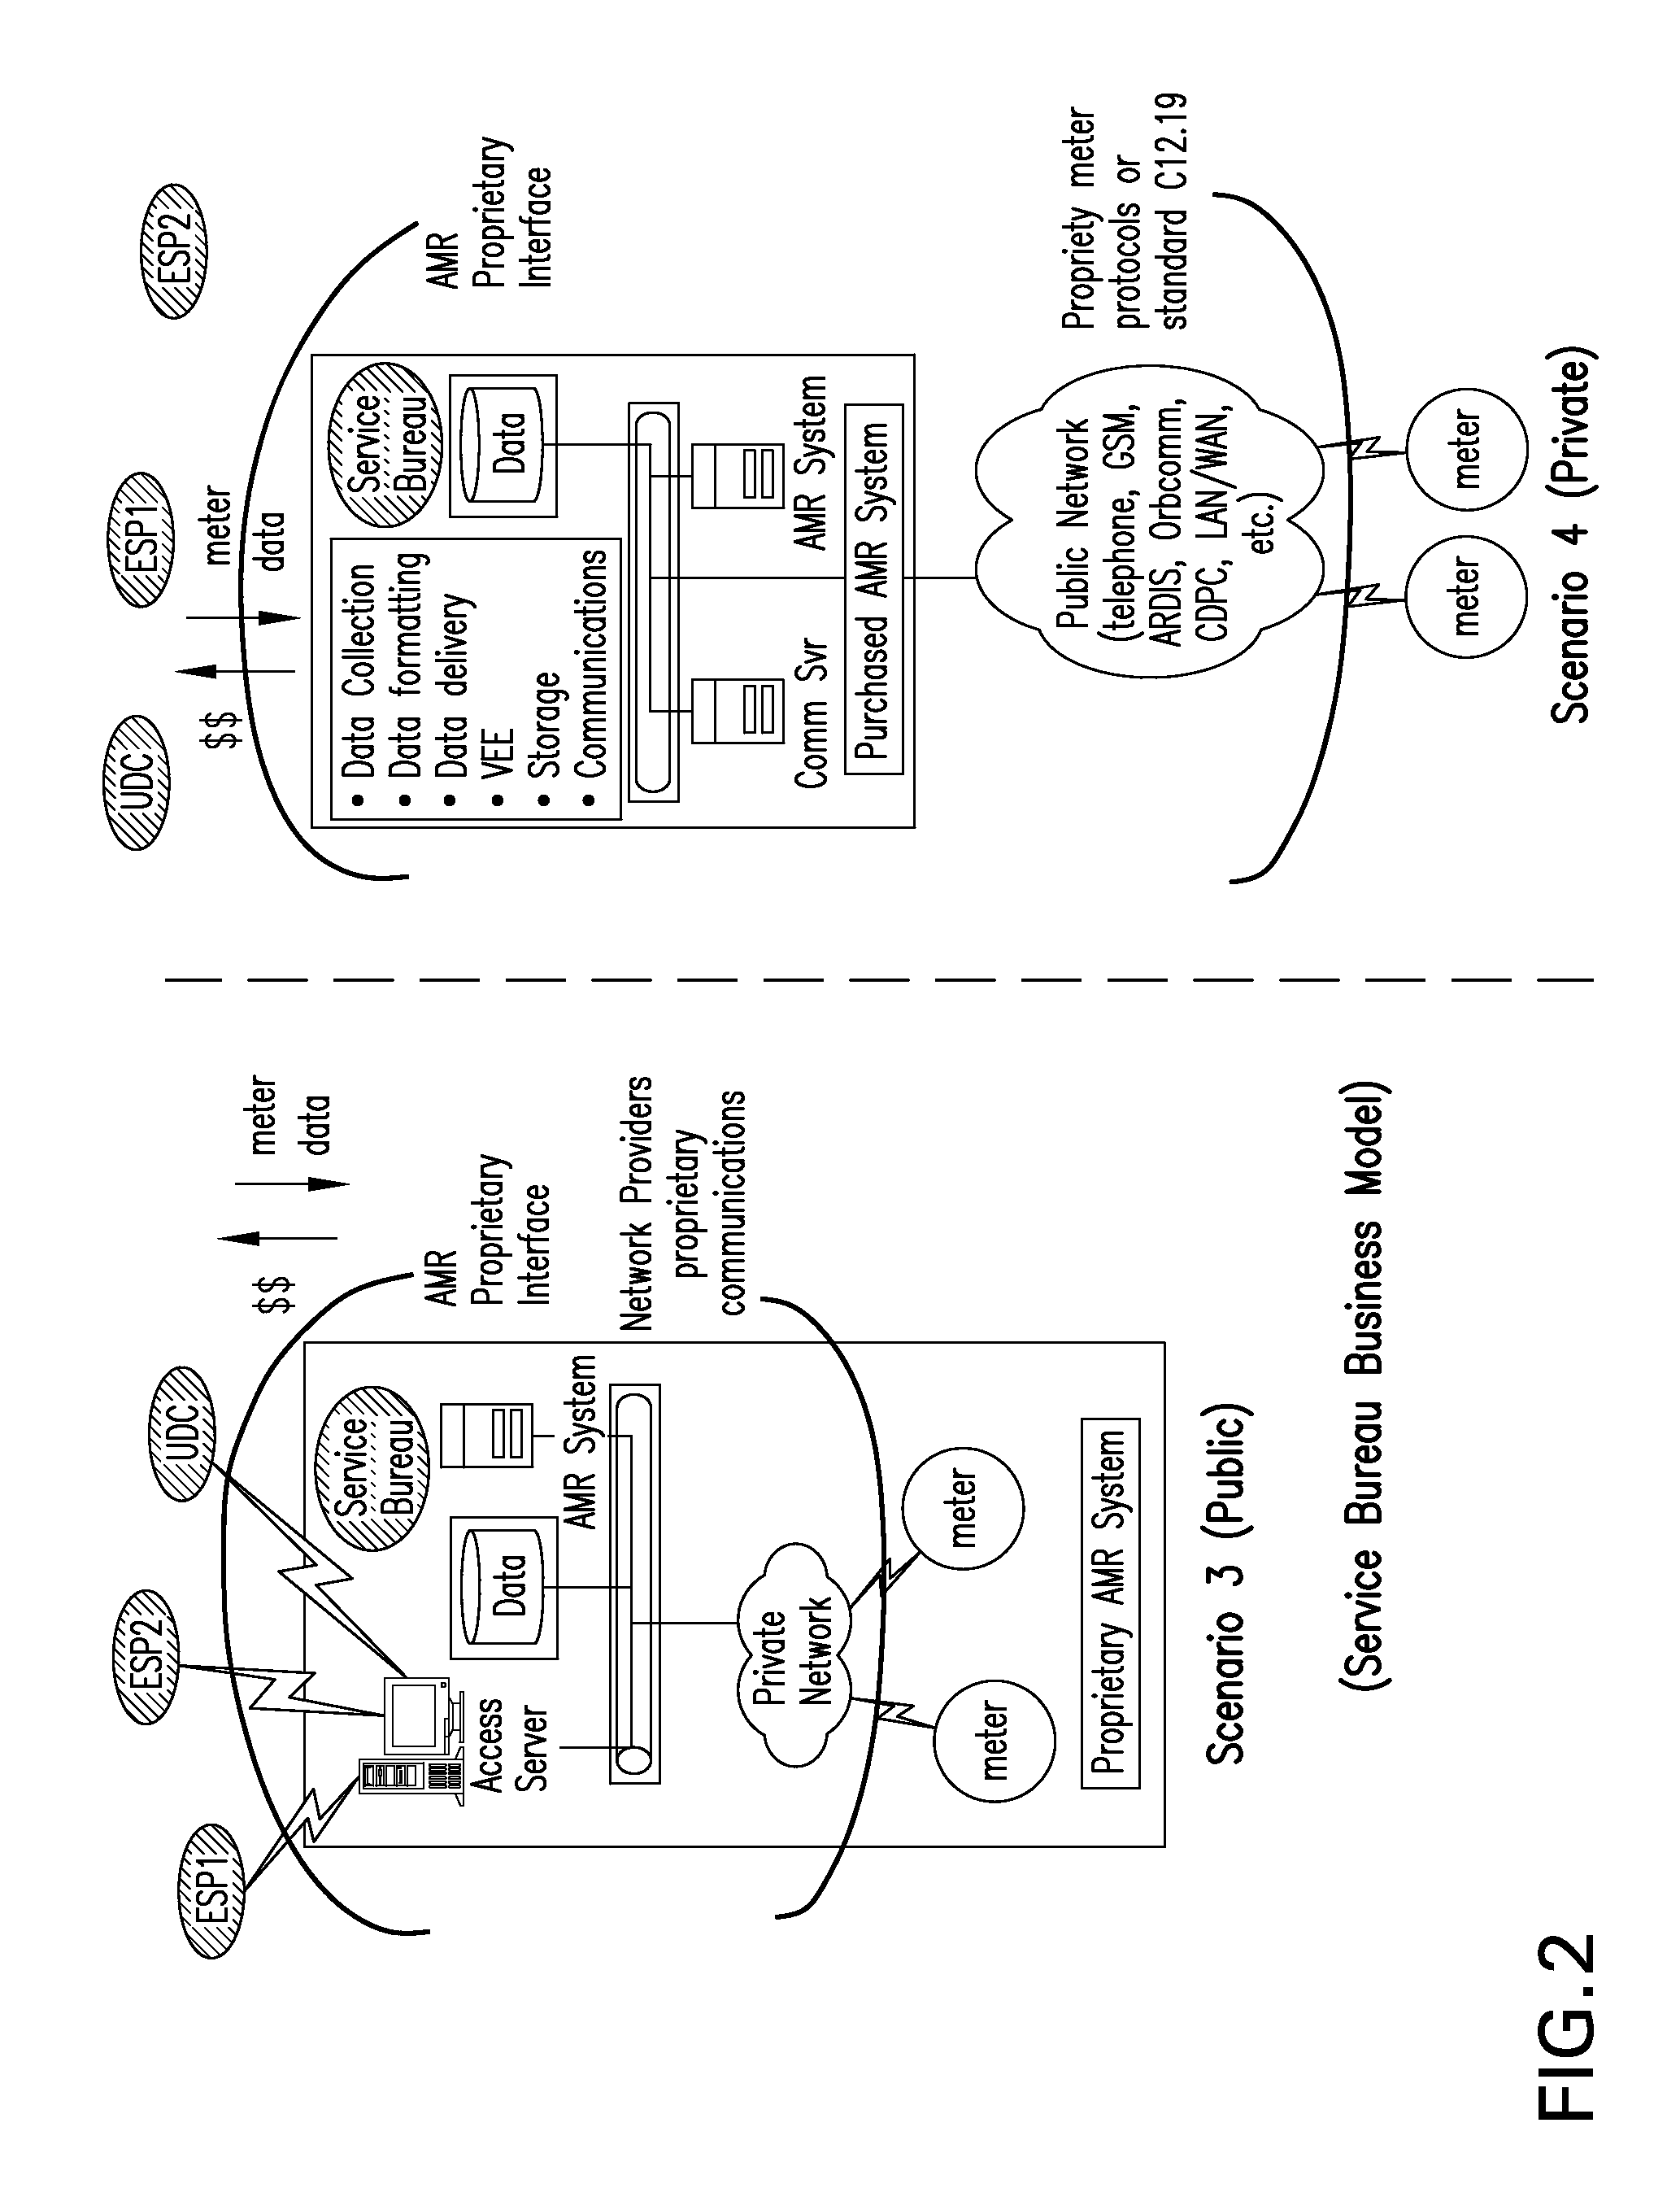 Systems and methods for managing advanced metering infrastructure